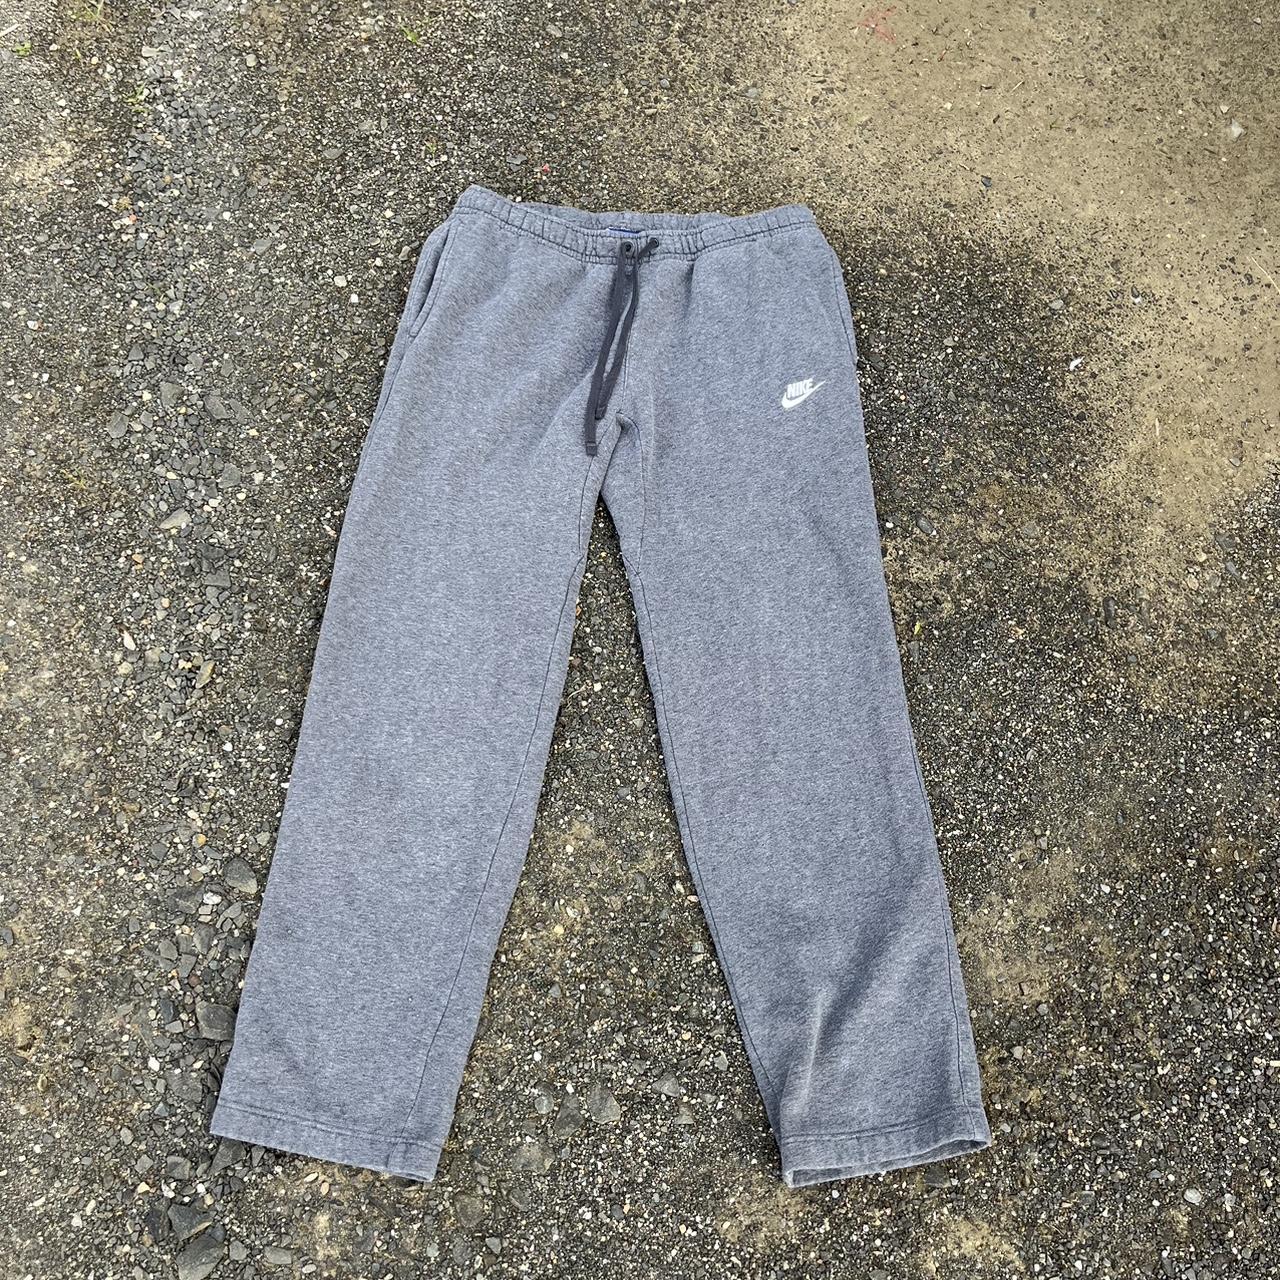 Essential Blue Tag Gray Nike Sweatpants with... - Depop